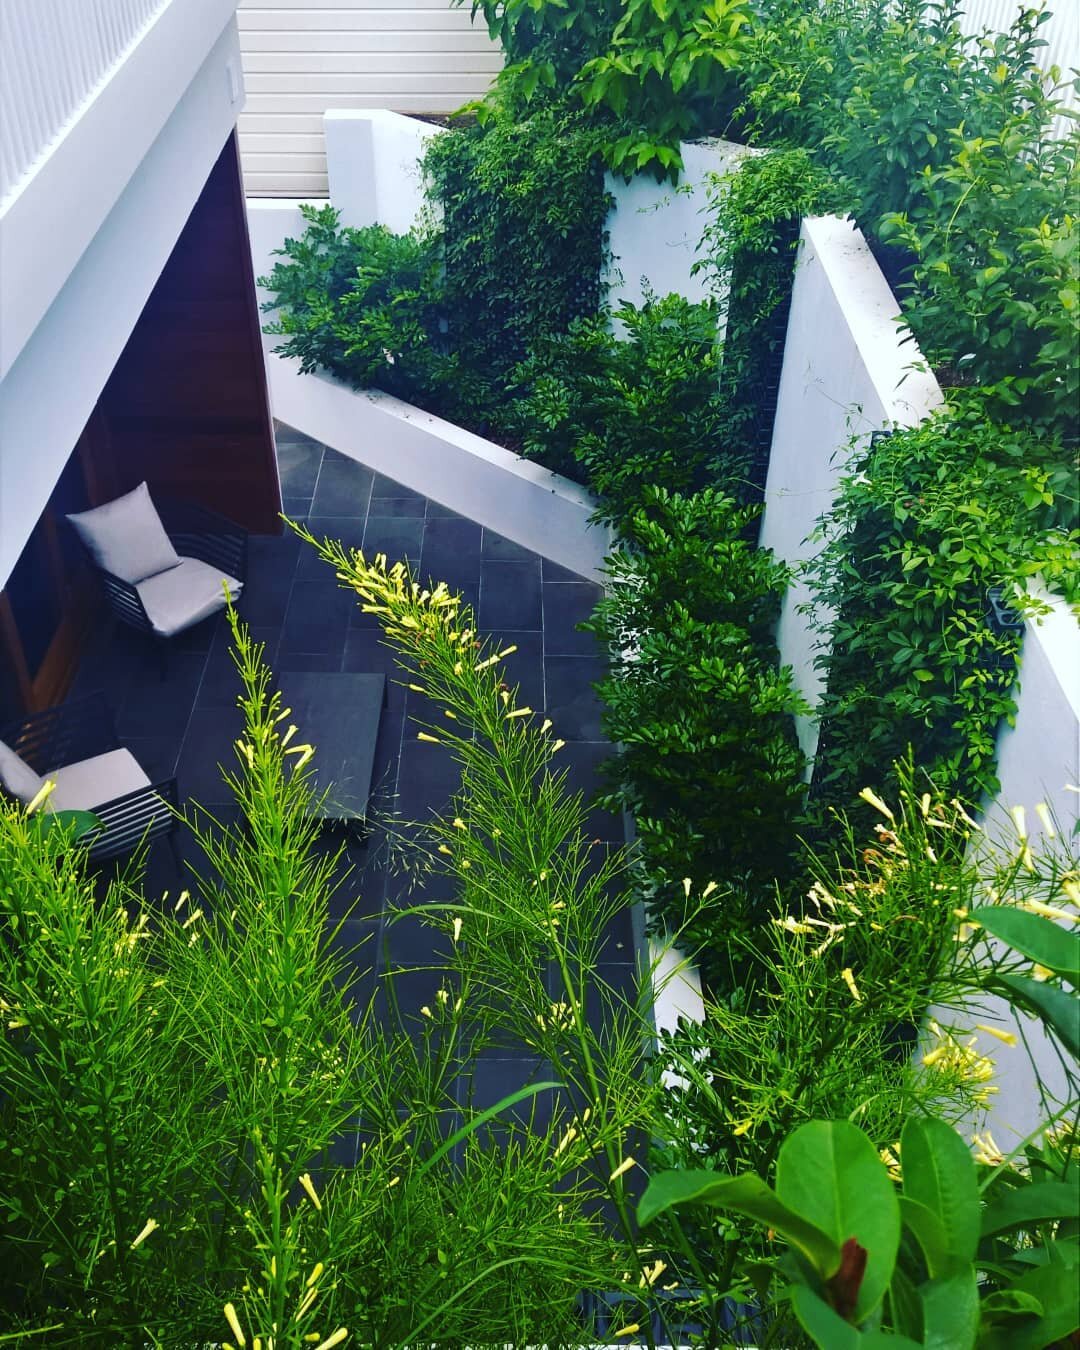 SUNKEN COURTYARD
Sloping sites can provide an opportunity to create a secluded retreat at the lower storey level. This stunning residence incorporates a private courtyard below the street level as the &ldquo;front yard&rdquo;, with plants taking over